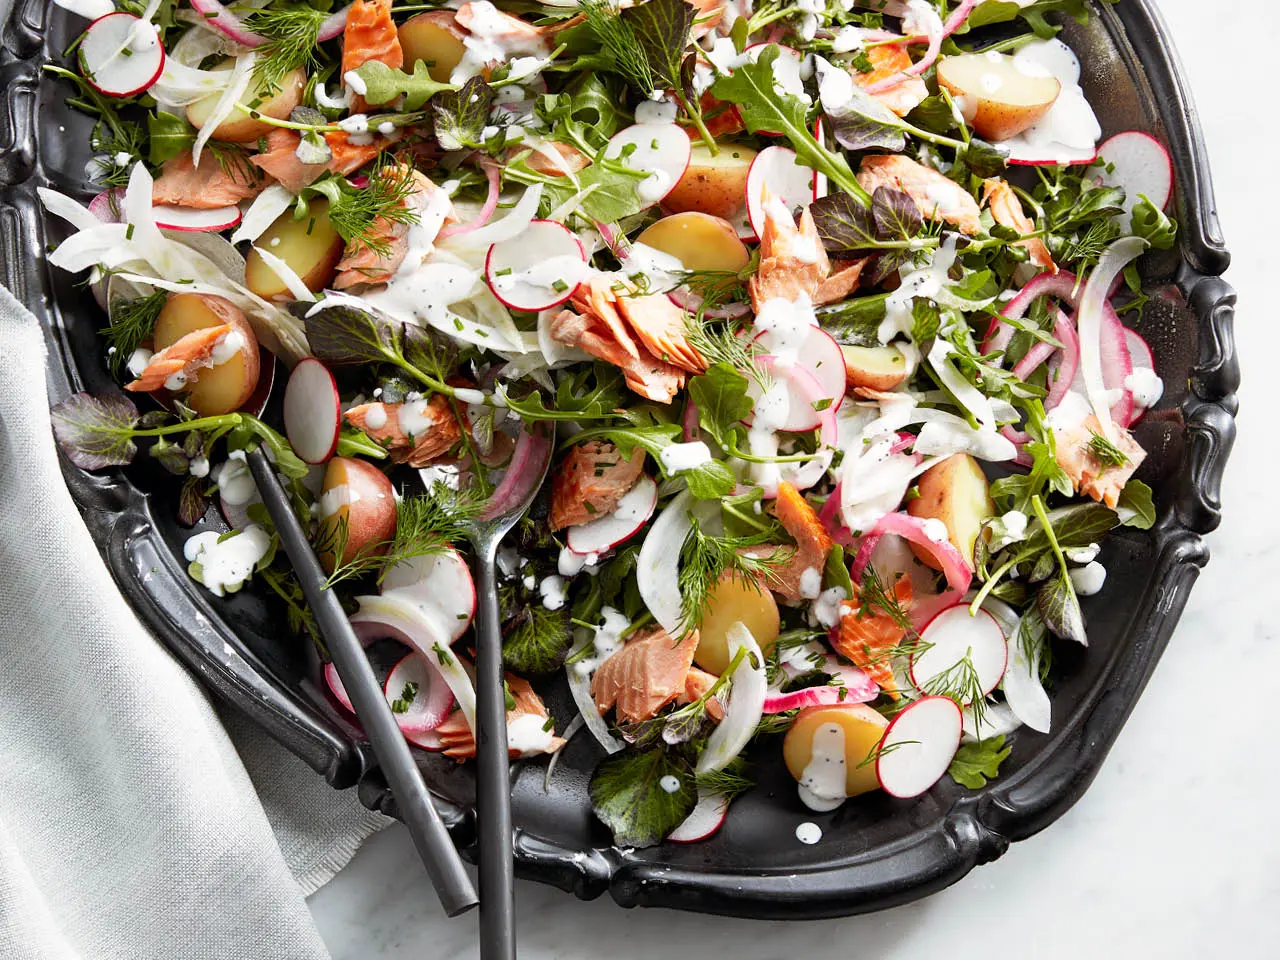 smoked trout salad with horseradish dressing - How many calories are in a smoked trout salad